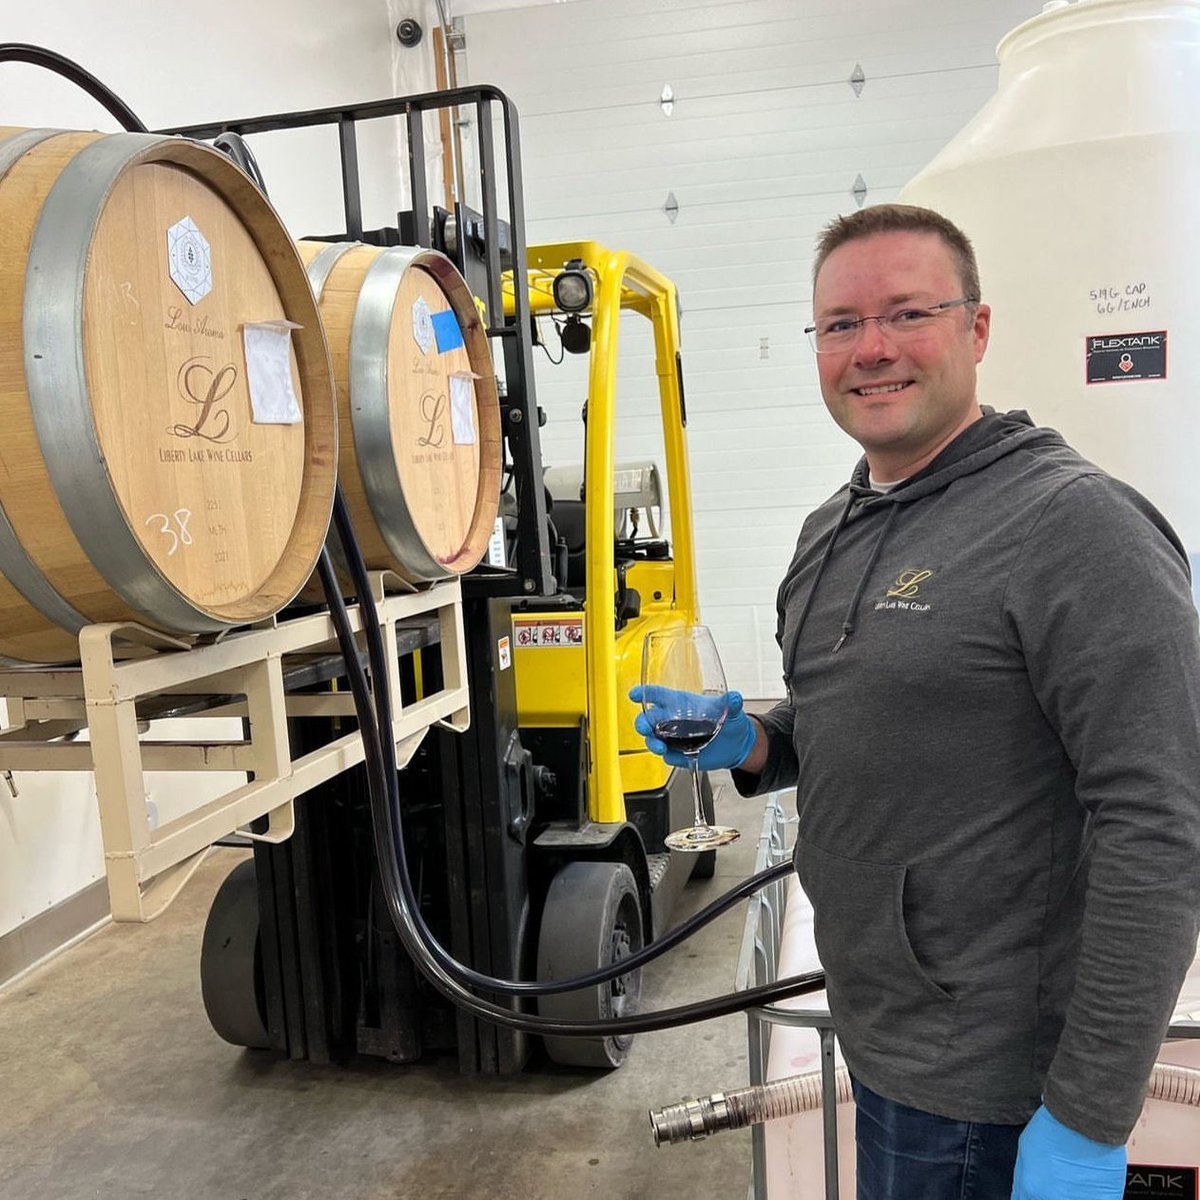 'Red Mountain class with Spokane pricing' is how Liberty Lake Winery promotes their #wines, sourced only from #RedMountain. All #redwine production made under a #solarpowered roof making this winery one of the few net-zero wineries in the state.